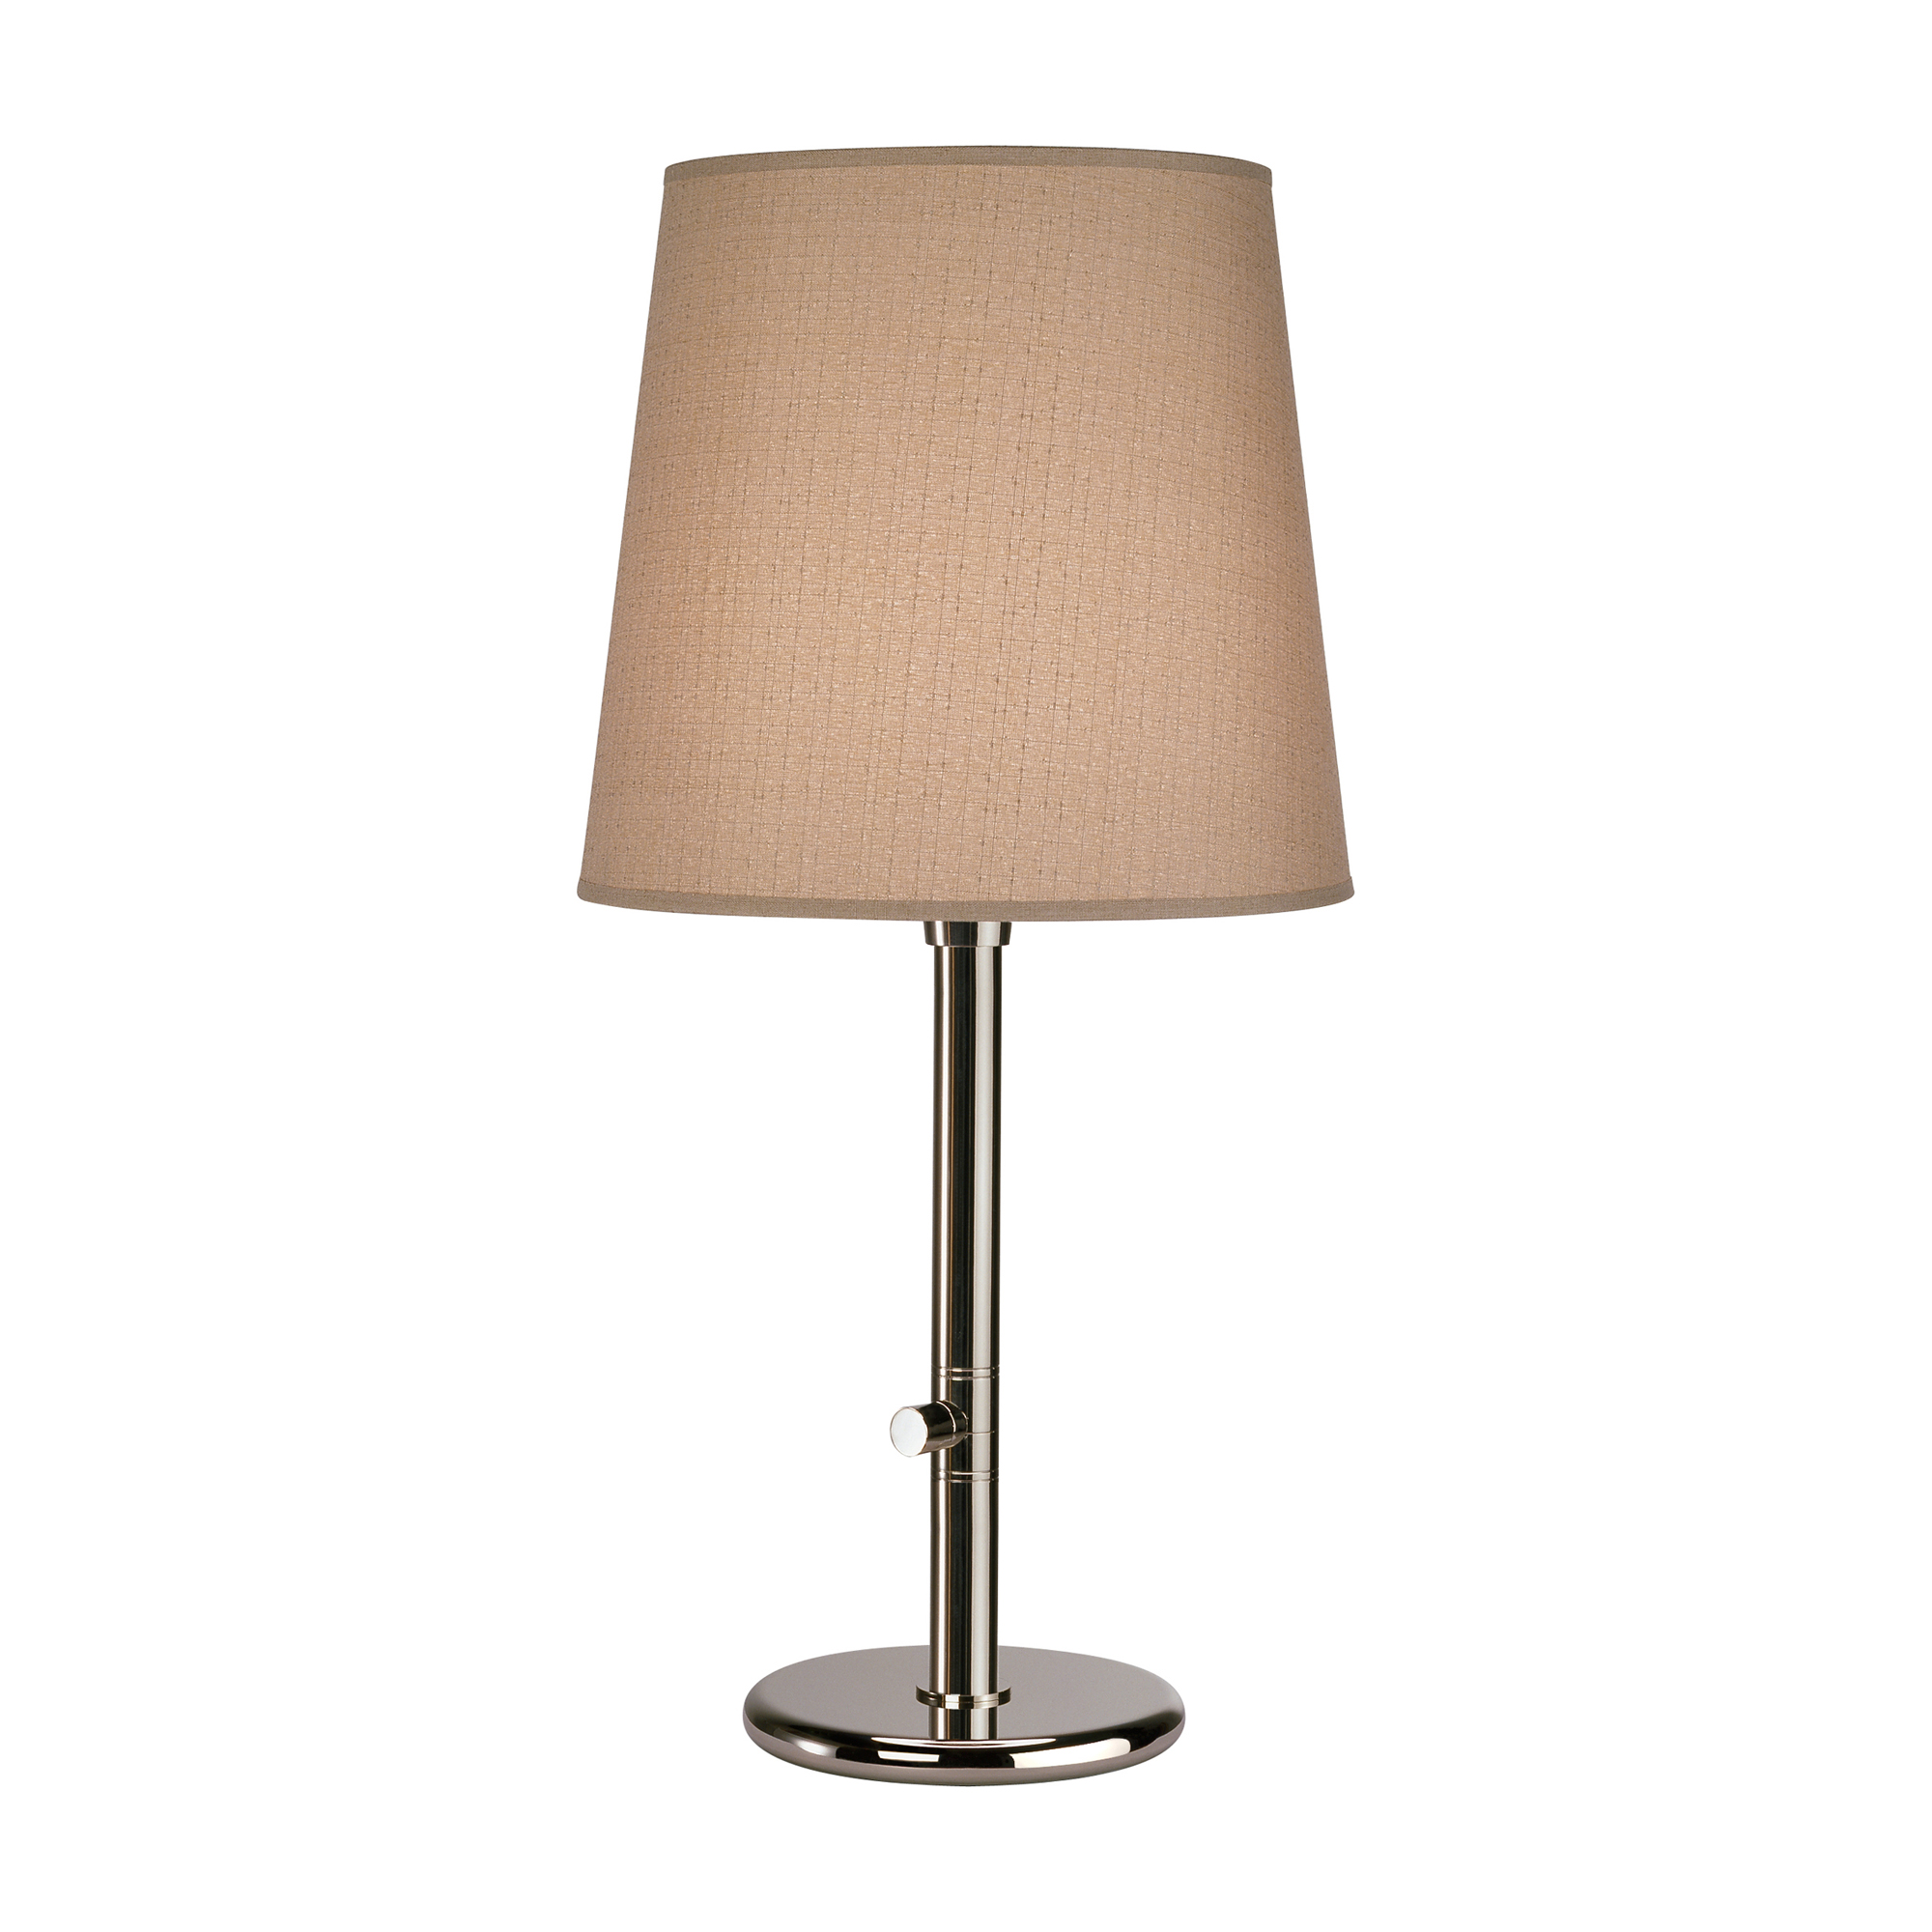 Rico Espinet Buster Chica Accent Lamp Style #2082